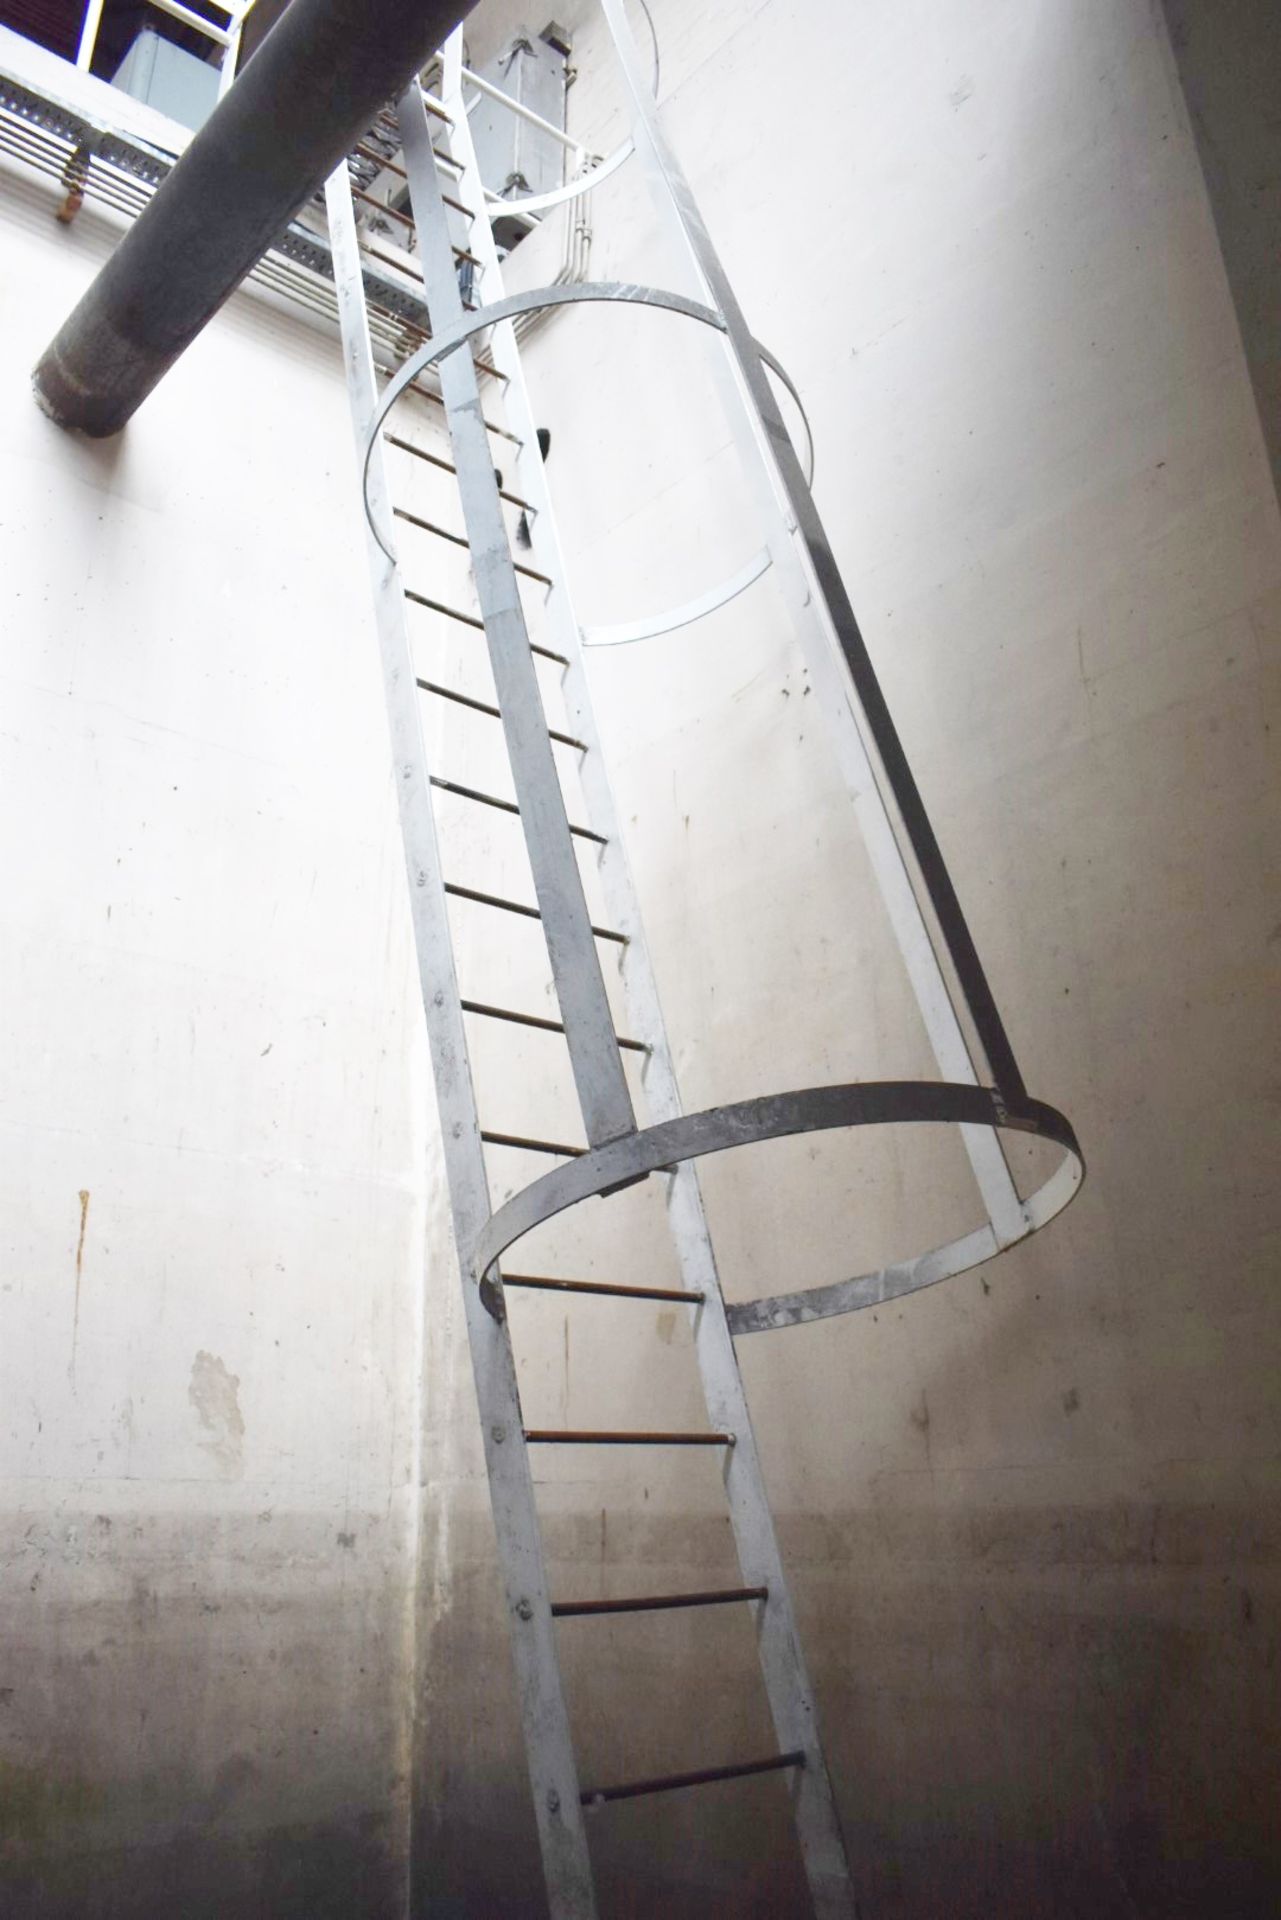 1 x Access Step Ladder With Safety Cage - Constructed From Steel - Height to Platform 550 cms - Image 3 of 6